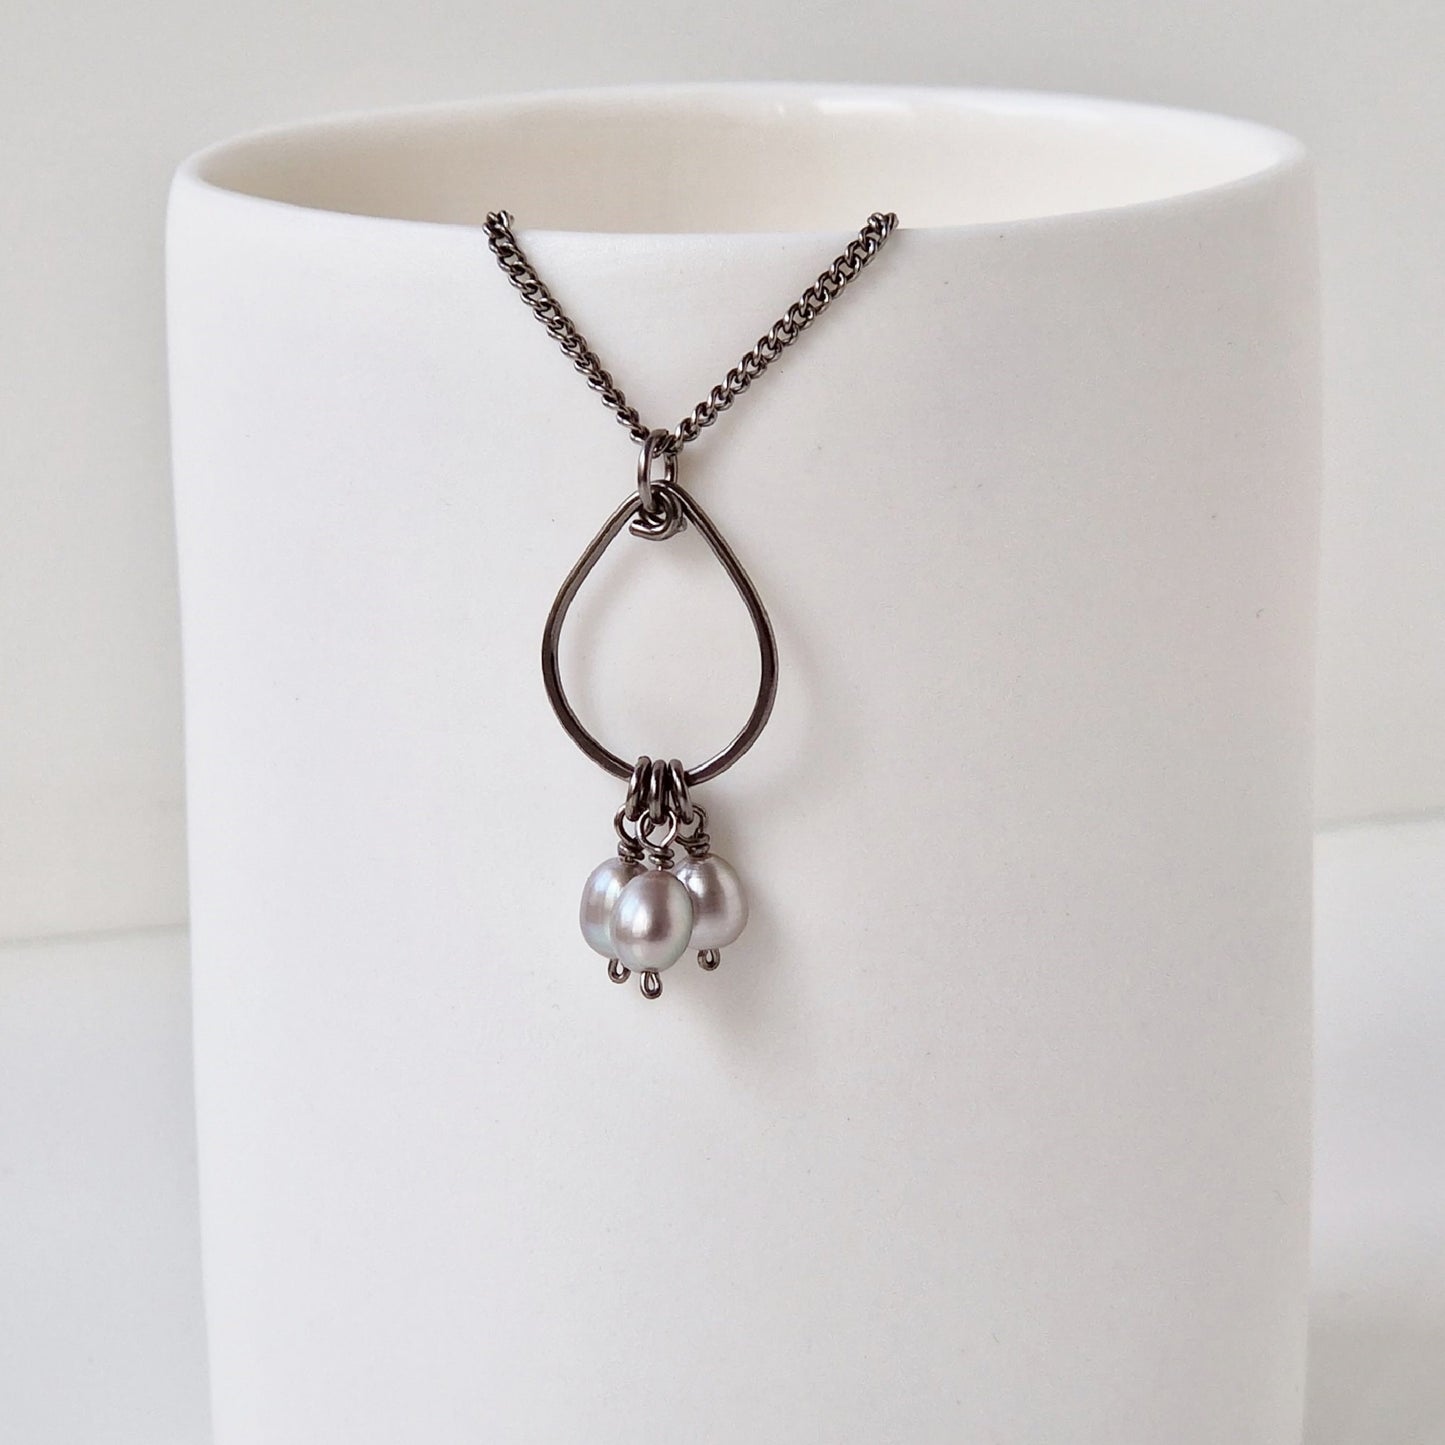 Titanium Teardrop Necklace with Gray Pearls